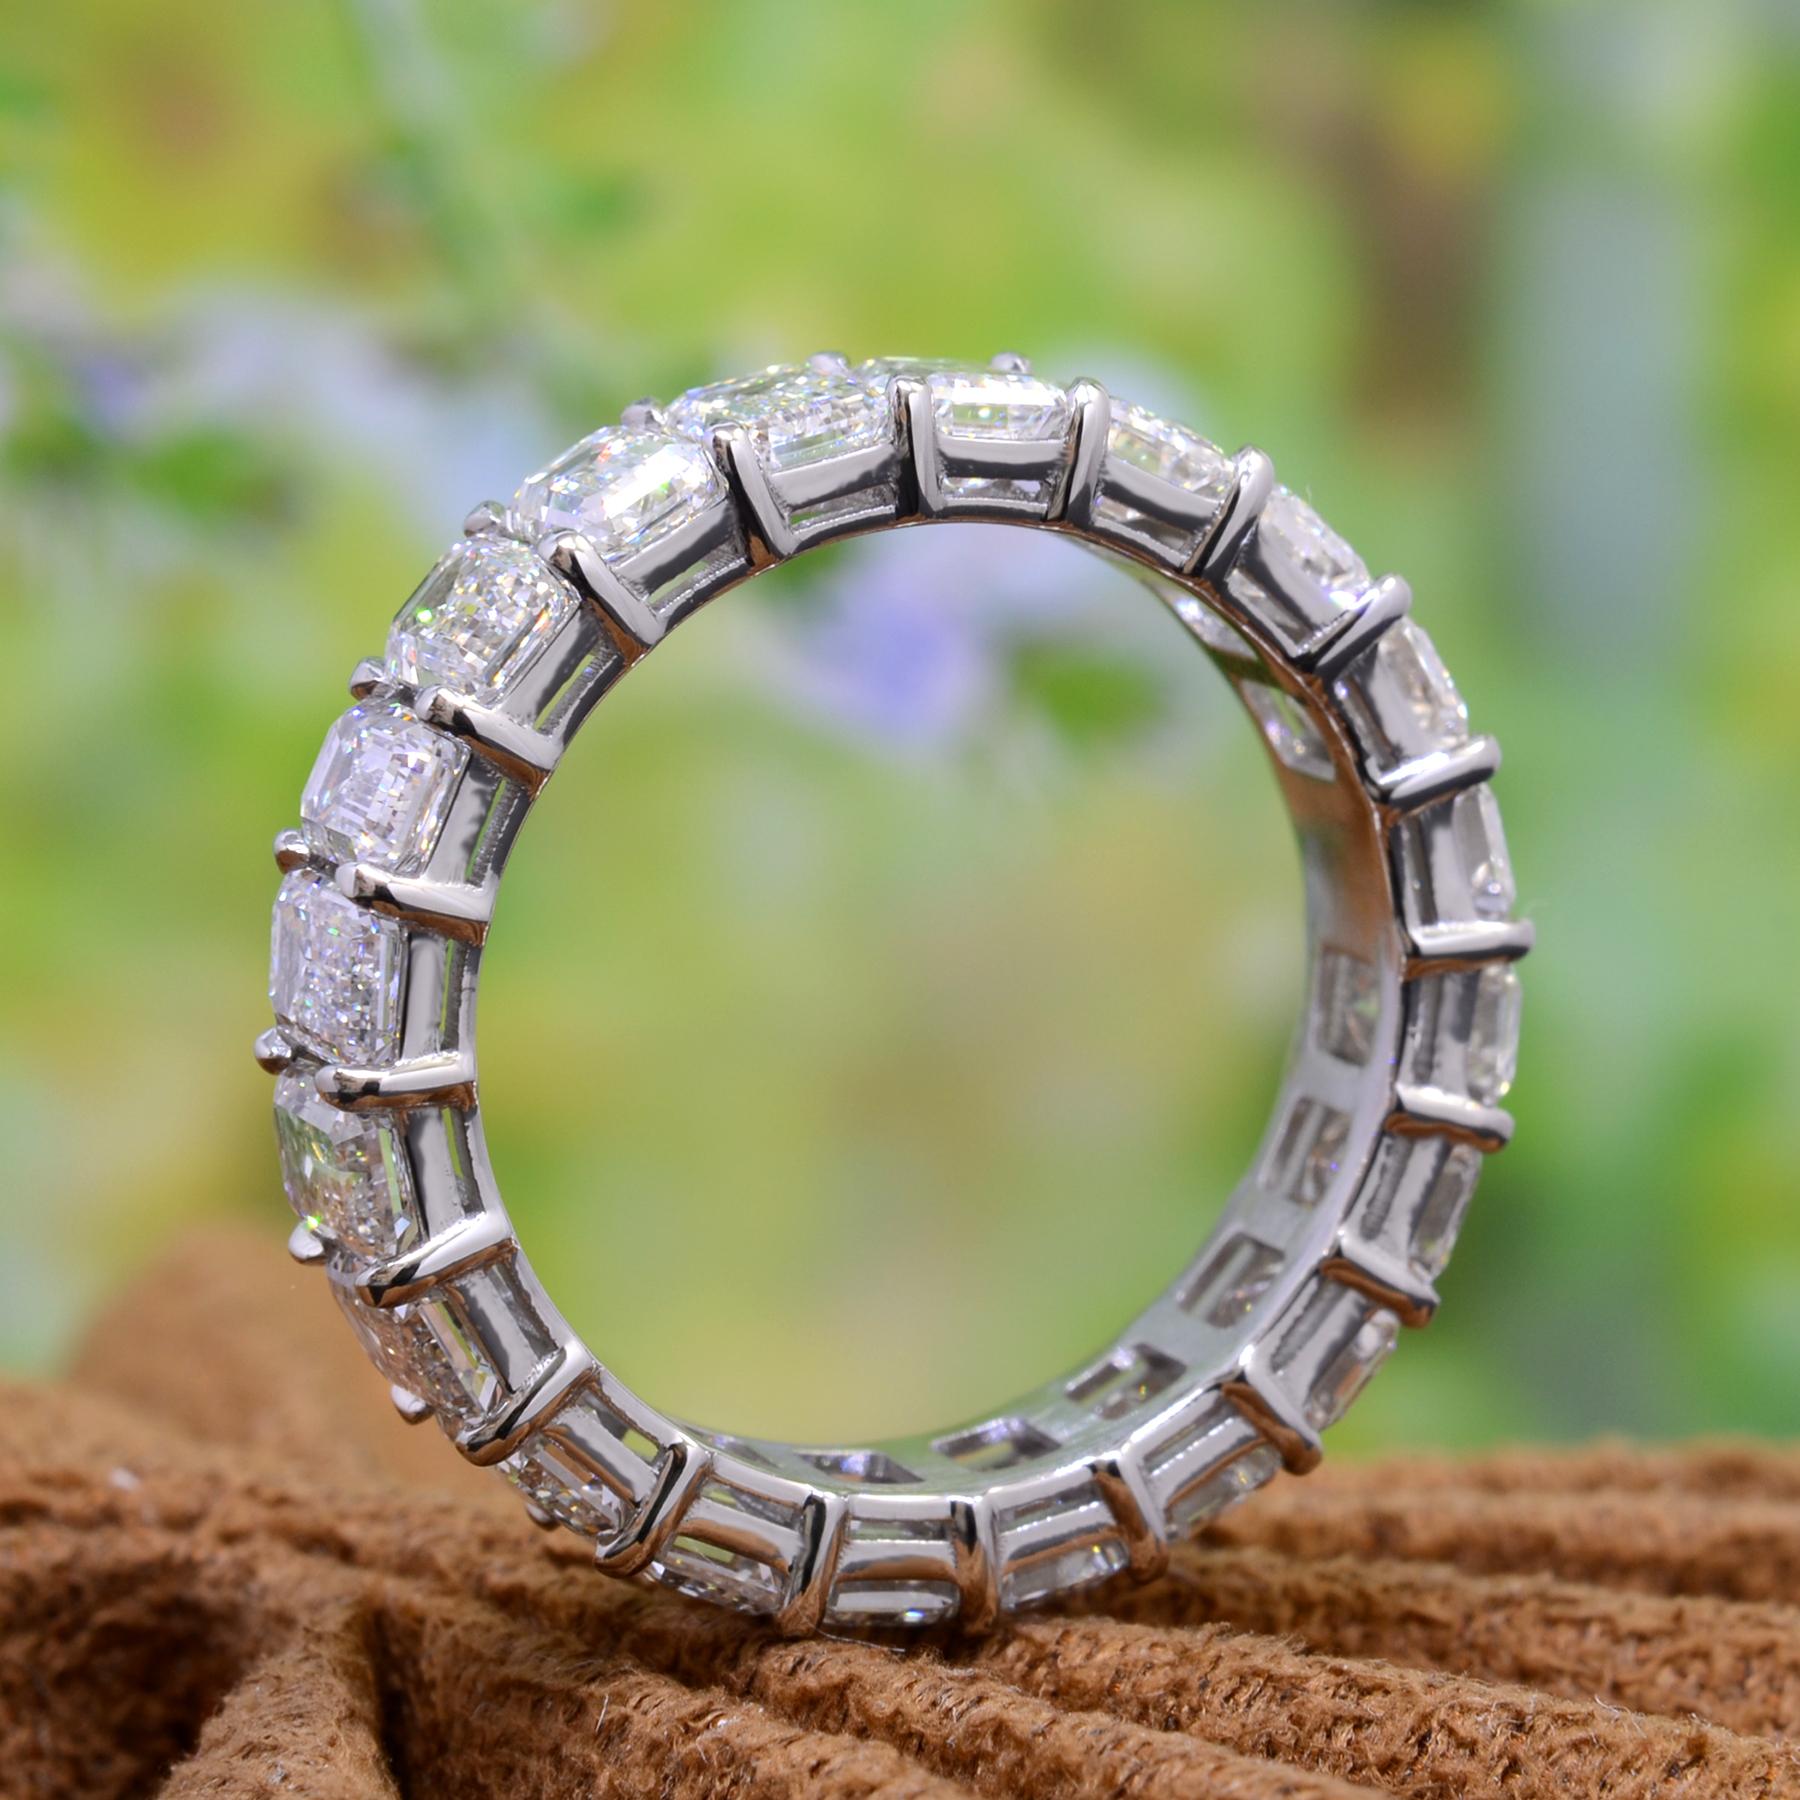 For Sale:  6 Carats Emerald Cut Eternity Band Shared Prongs F-G Color VS1 Clarity Platinum 5